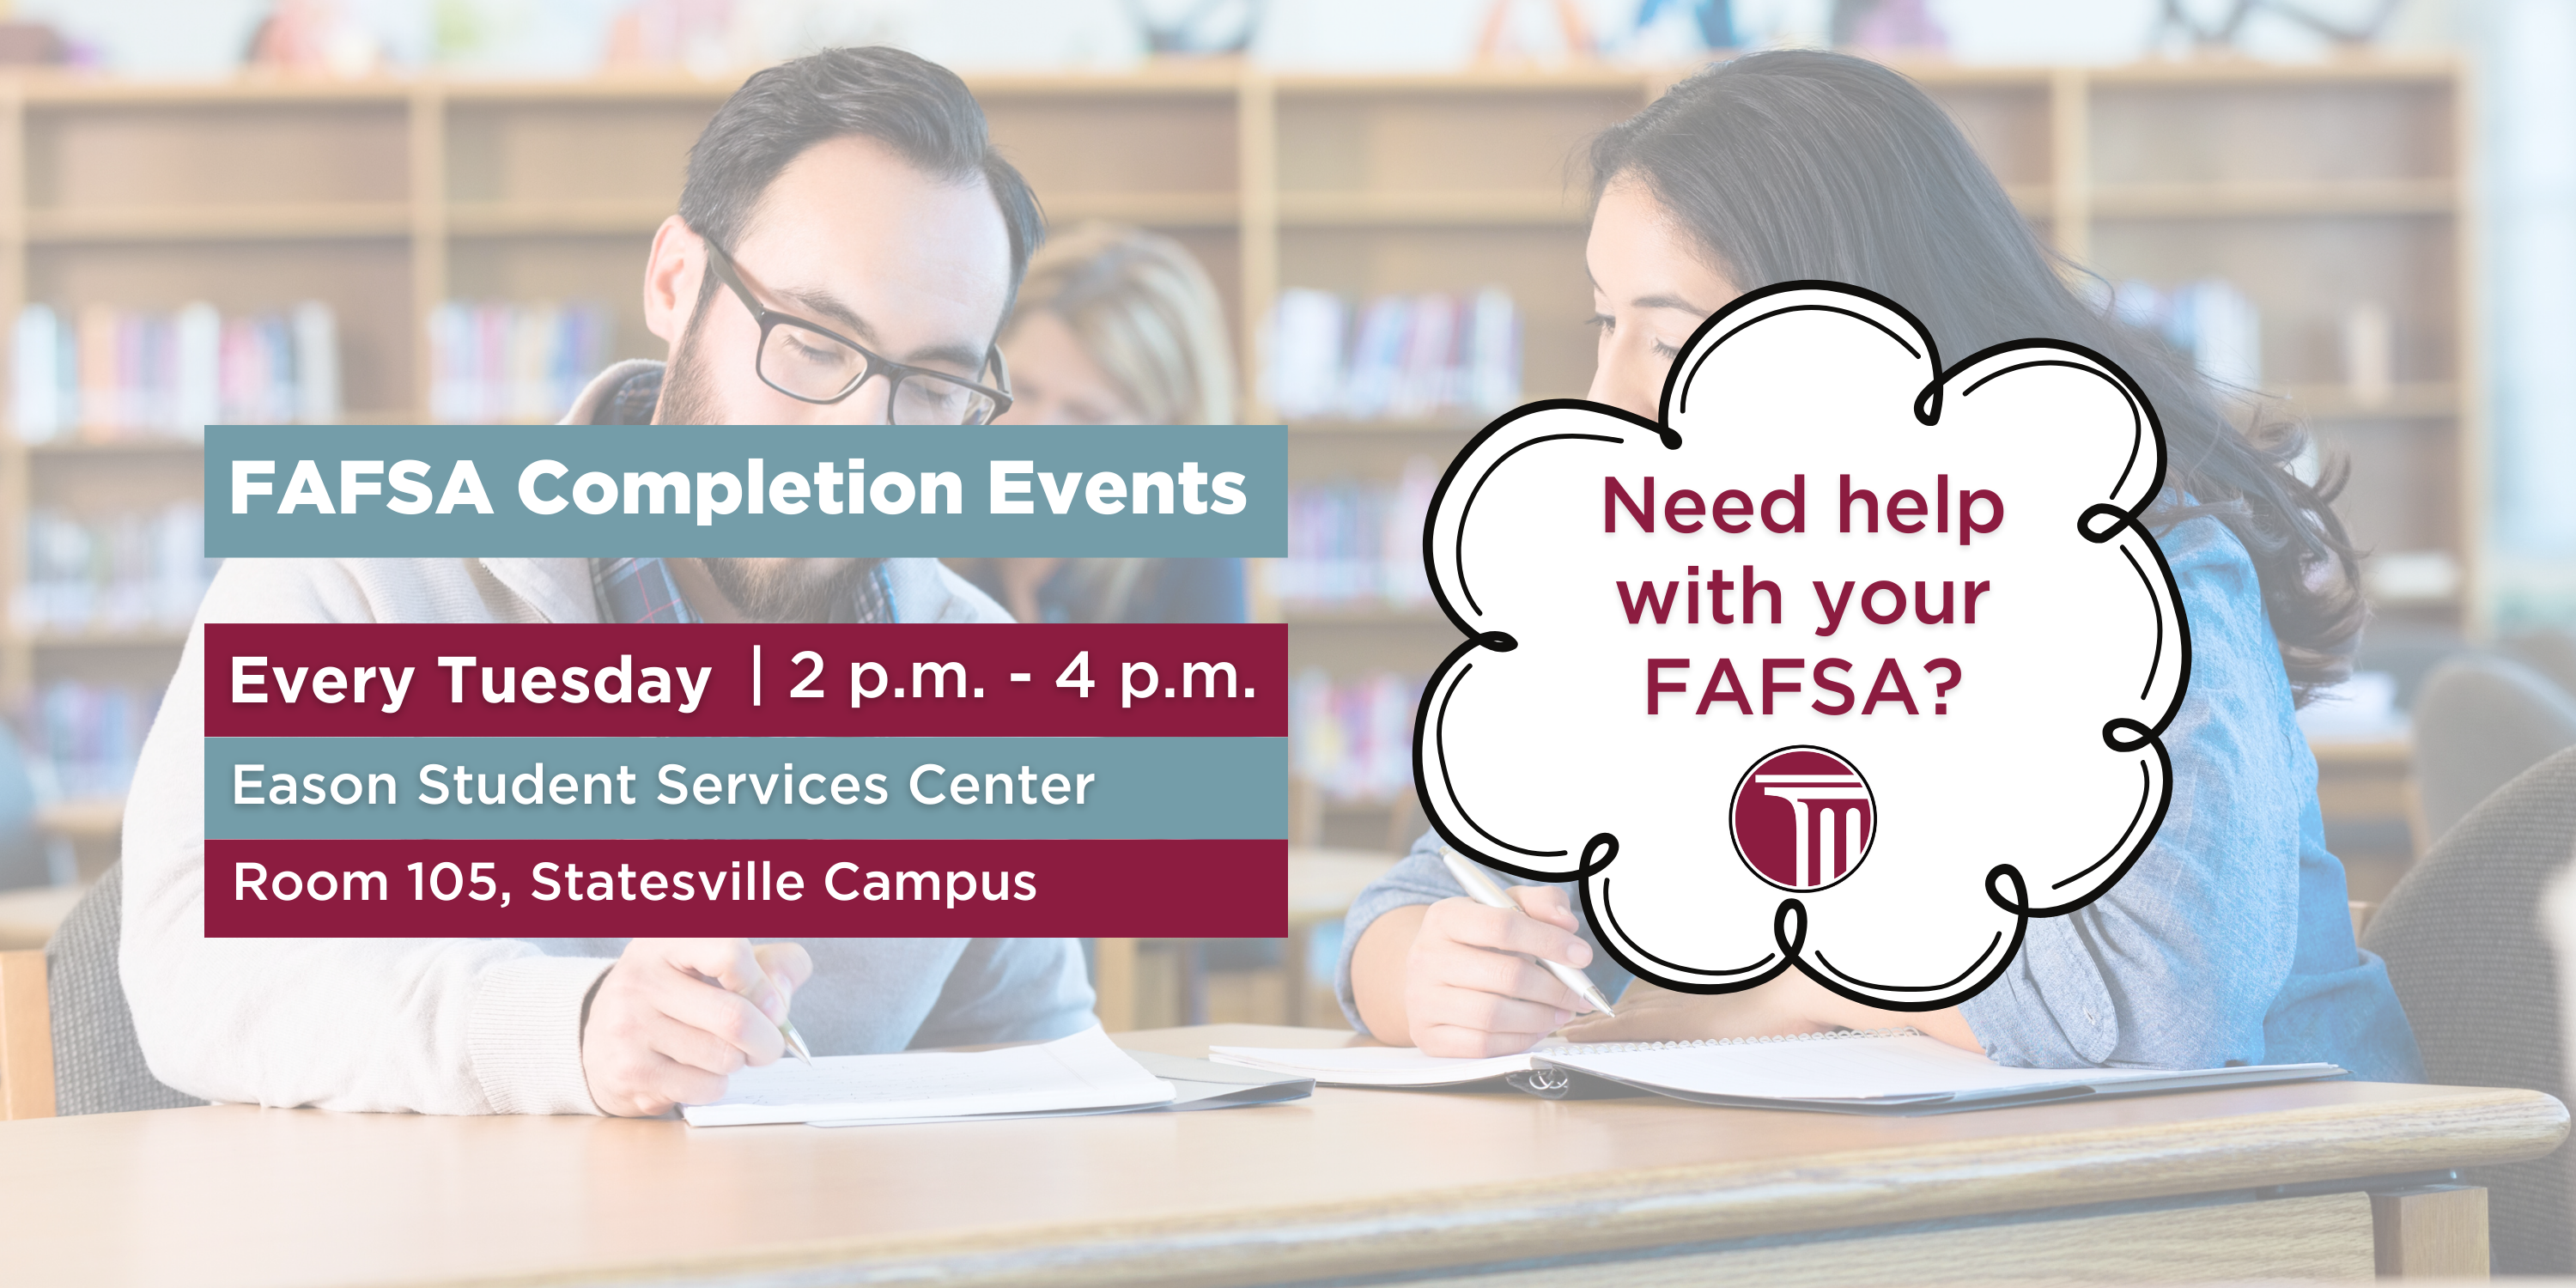 Banner that reads "FAFSA Completion Events | Every Tuesday | 2 p.m. - 4 p.m. | Eason Student Services Center - Room 105, Statesville Campus | Need help with your FAFSA?".